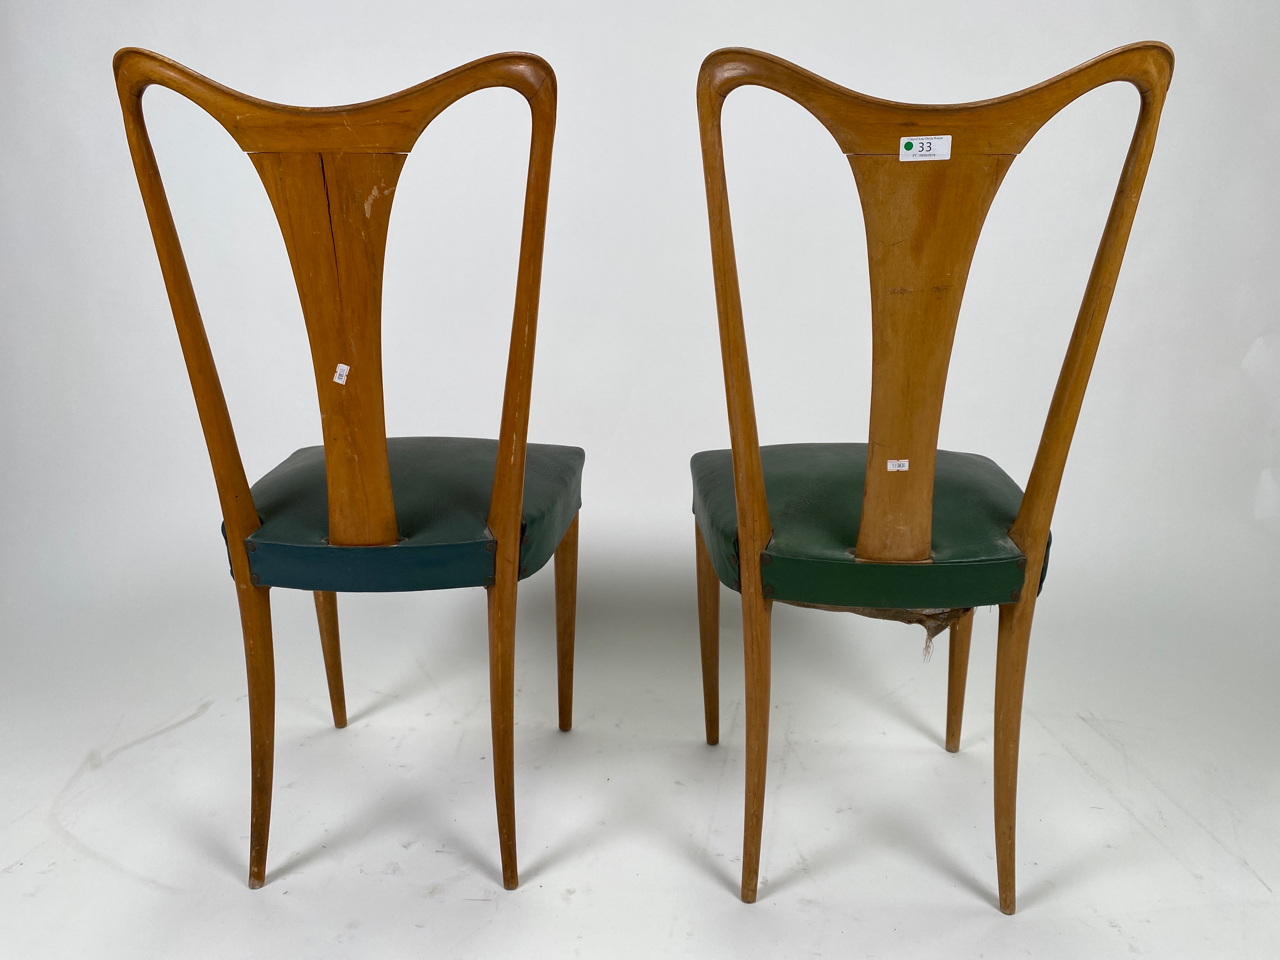 Pair of Ico Parisi Mid-Century Leather Chairs - Image 5 of 7